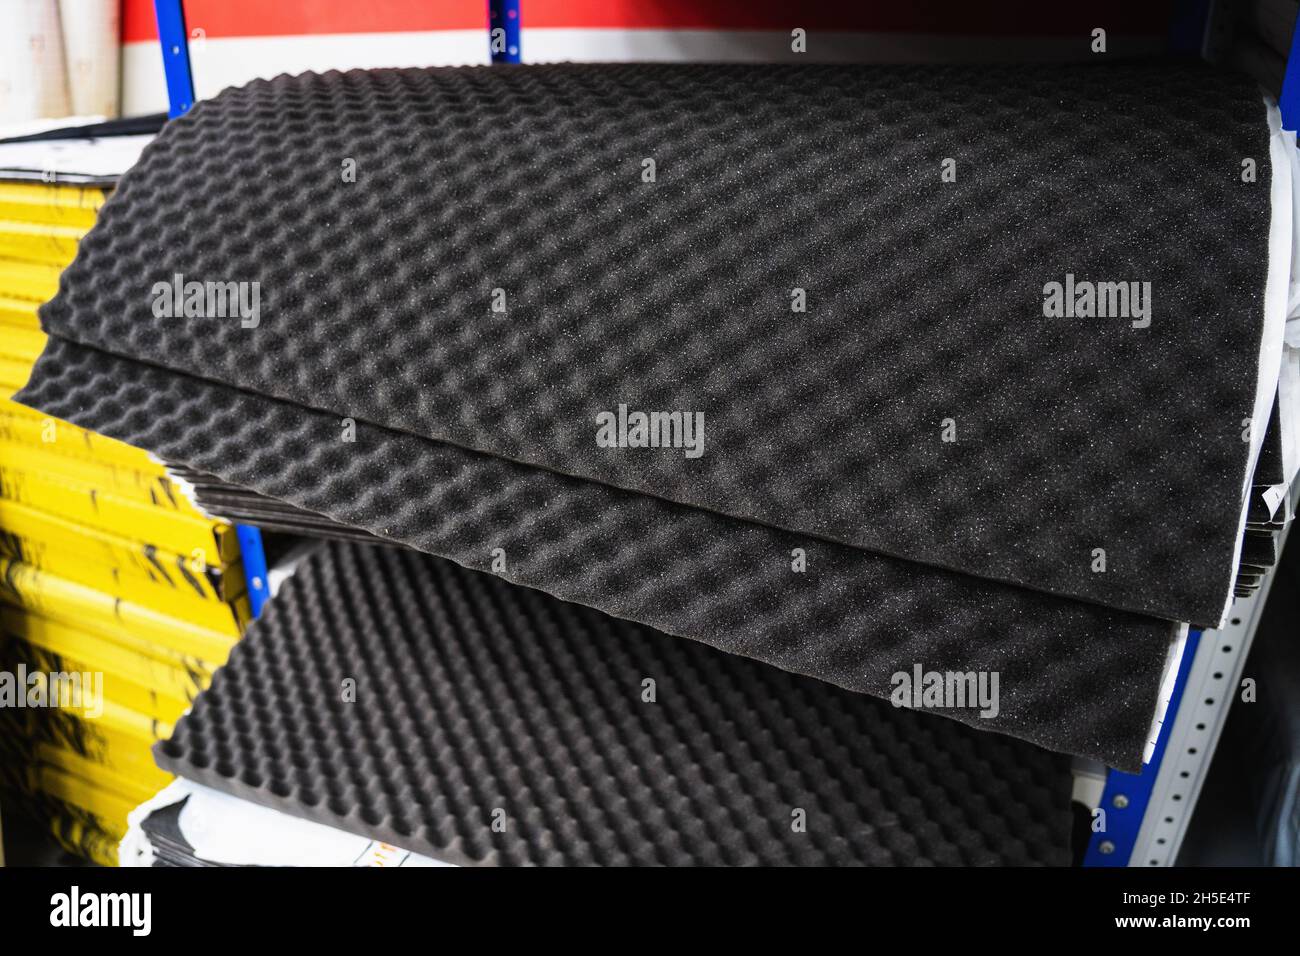 Soundproofing for car tuning. Auto sound, vibration and noise insulation protection material. Stock Photo